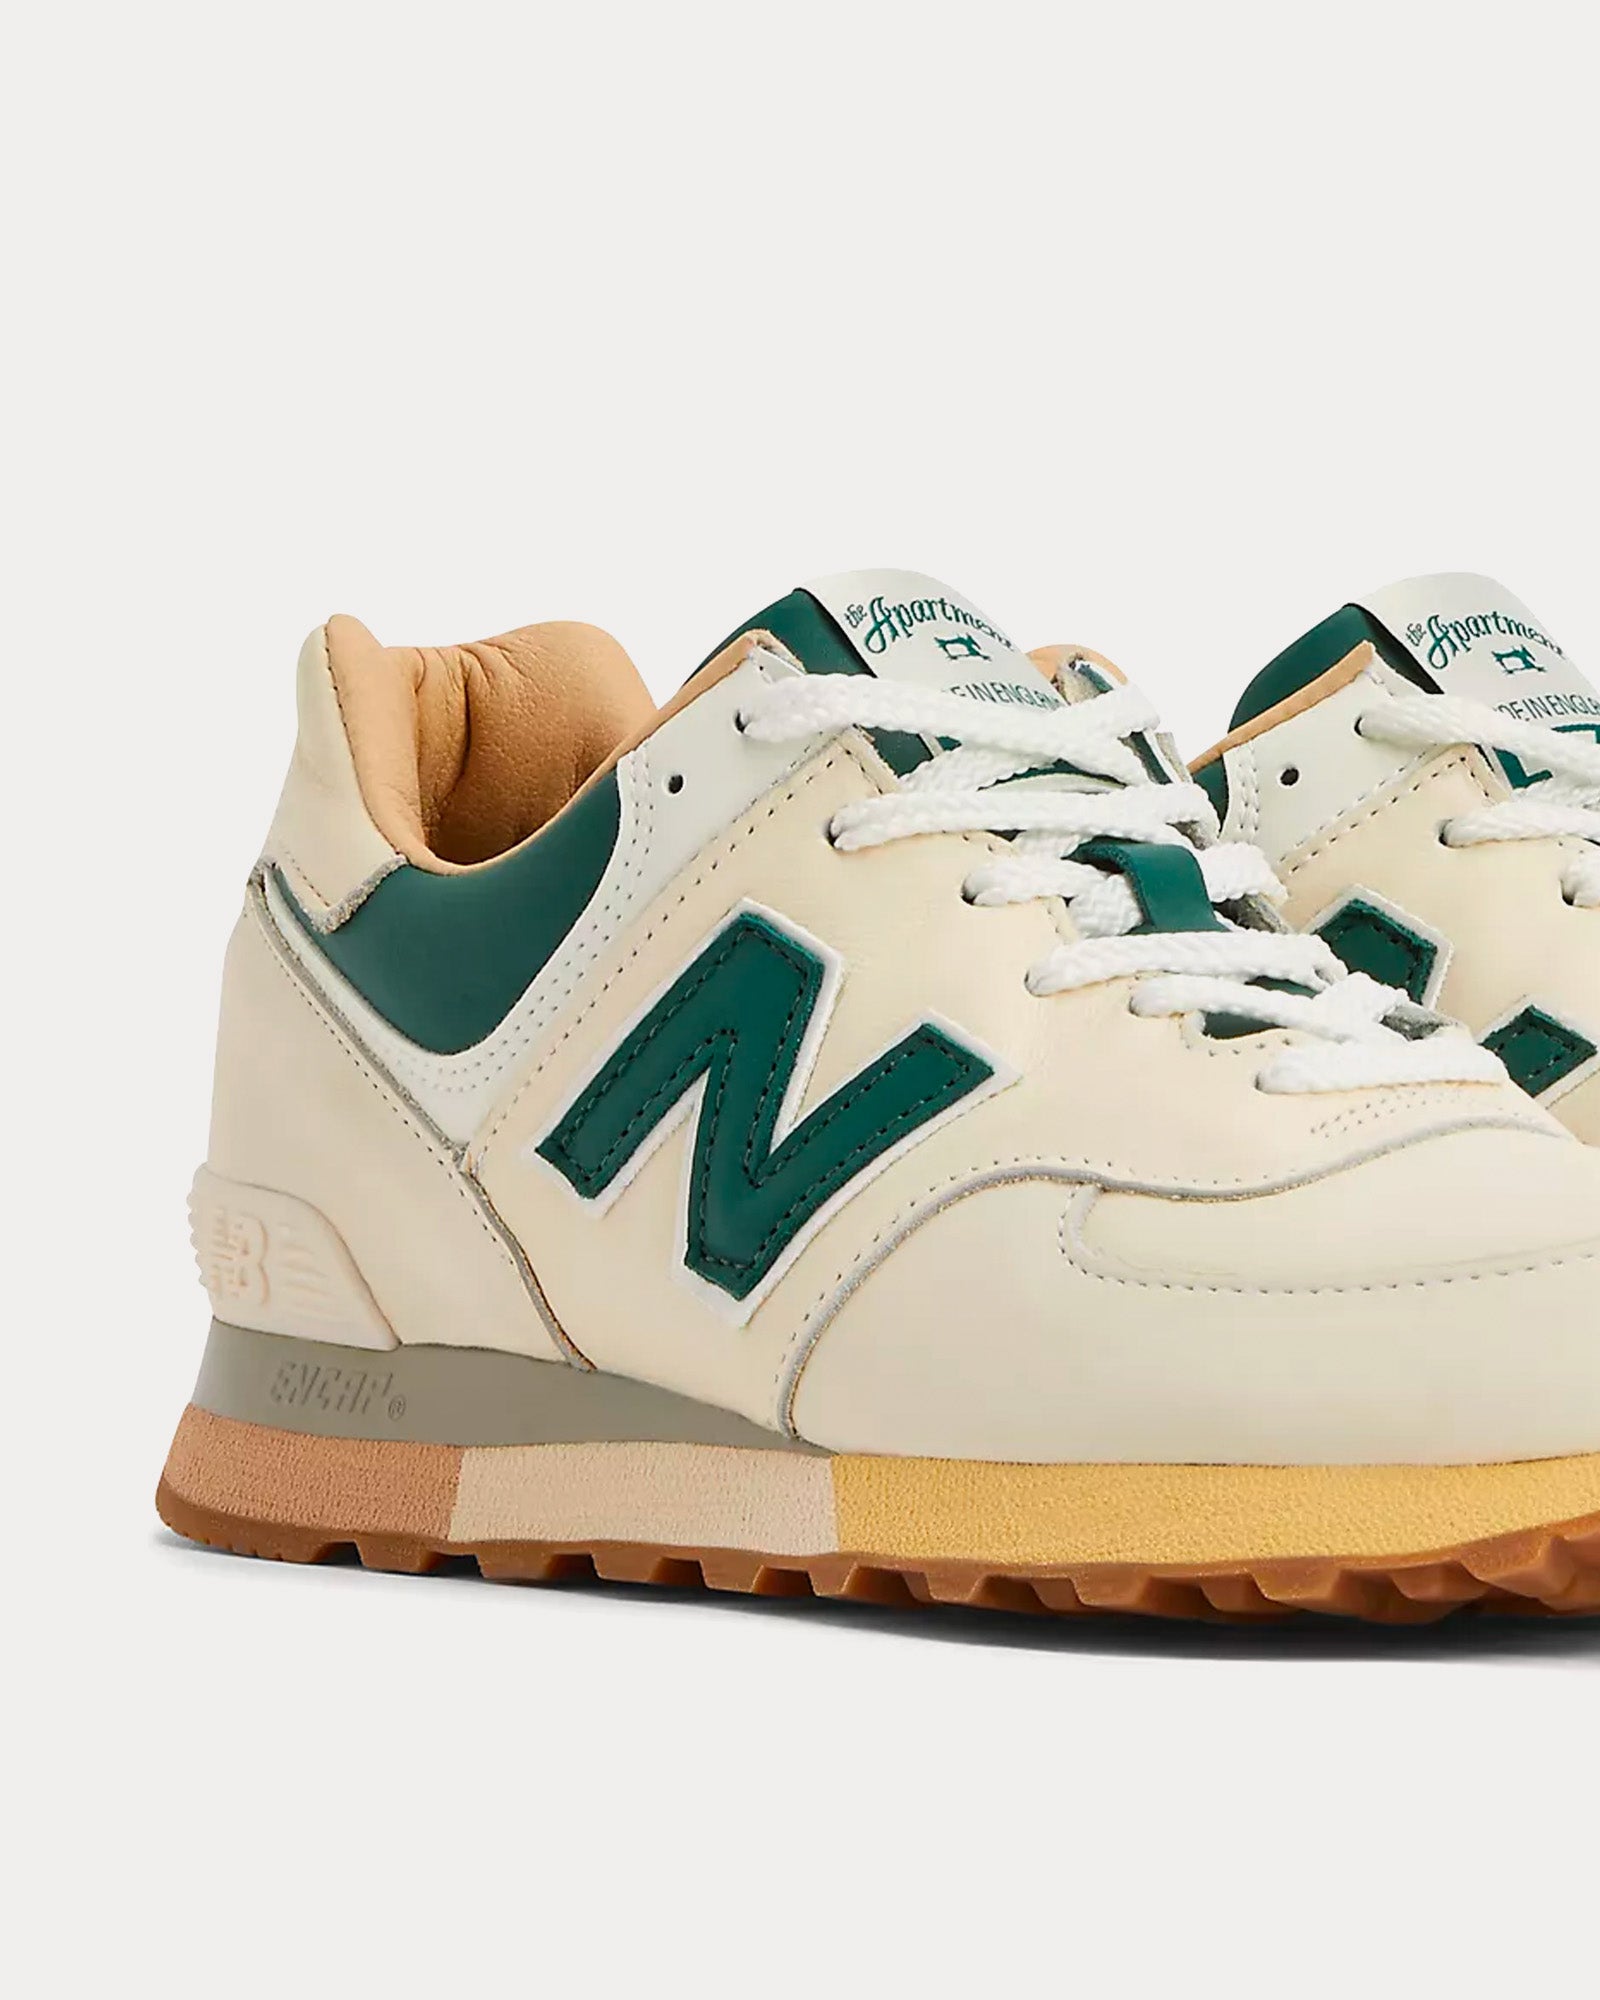 New Balance x The Apartment - MADE in UK 576 Antique White / Evergreen / London Fog Low Top Sneakers